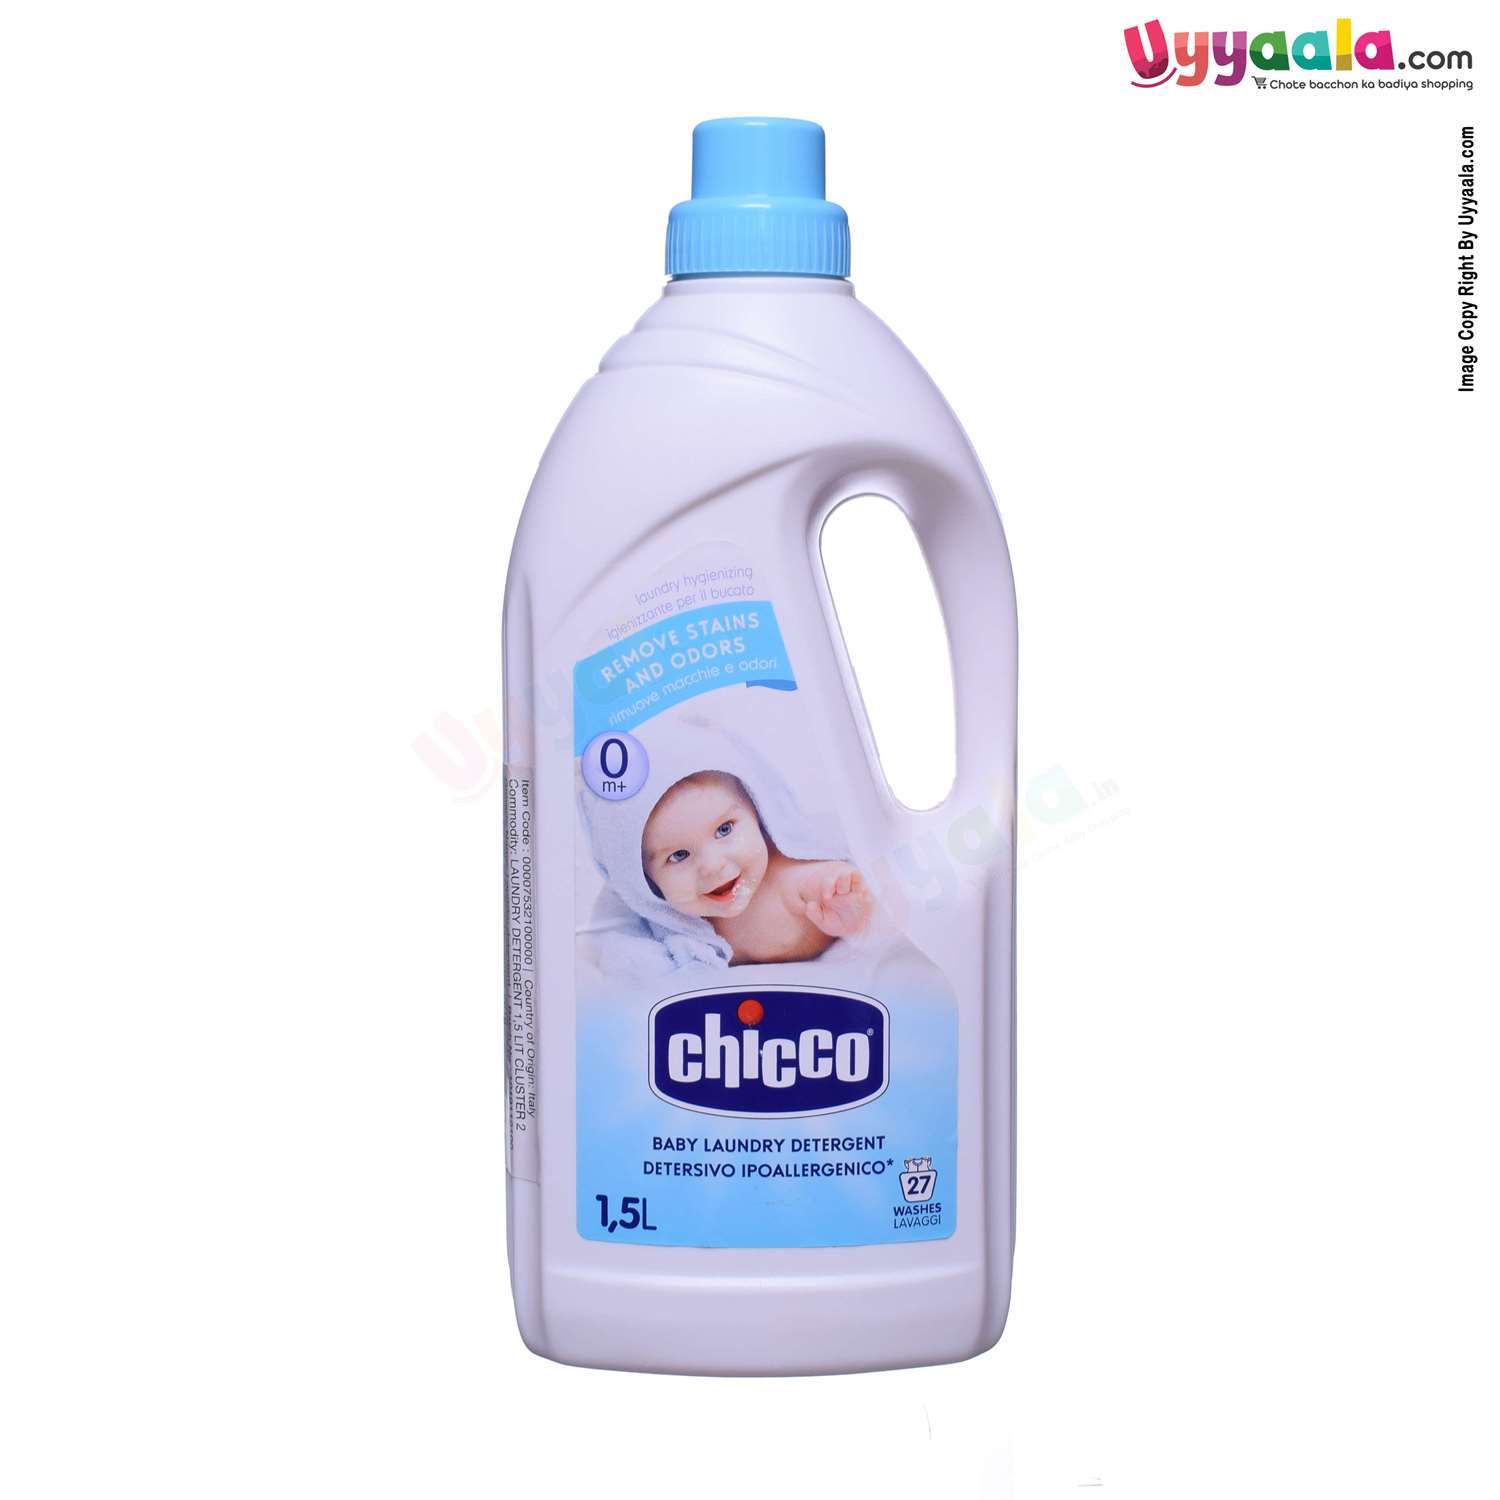 Laundry detergent for babies